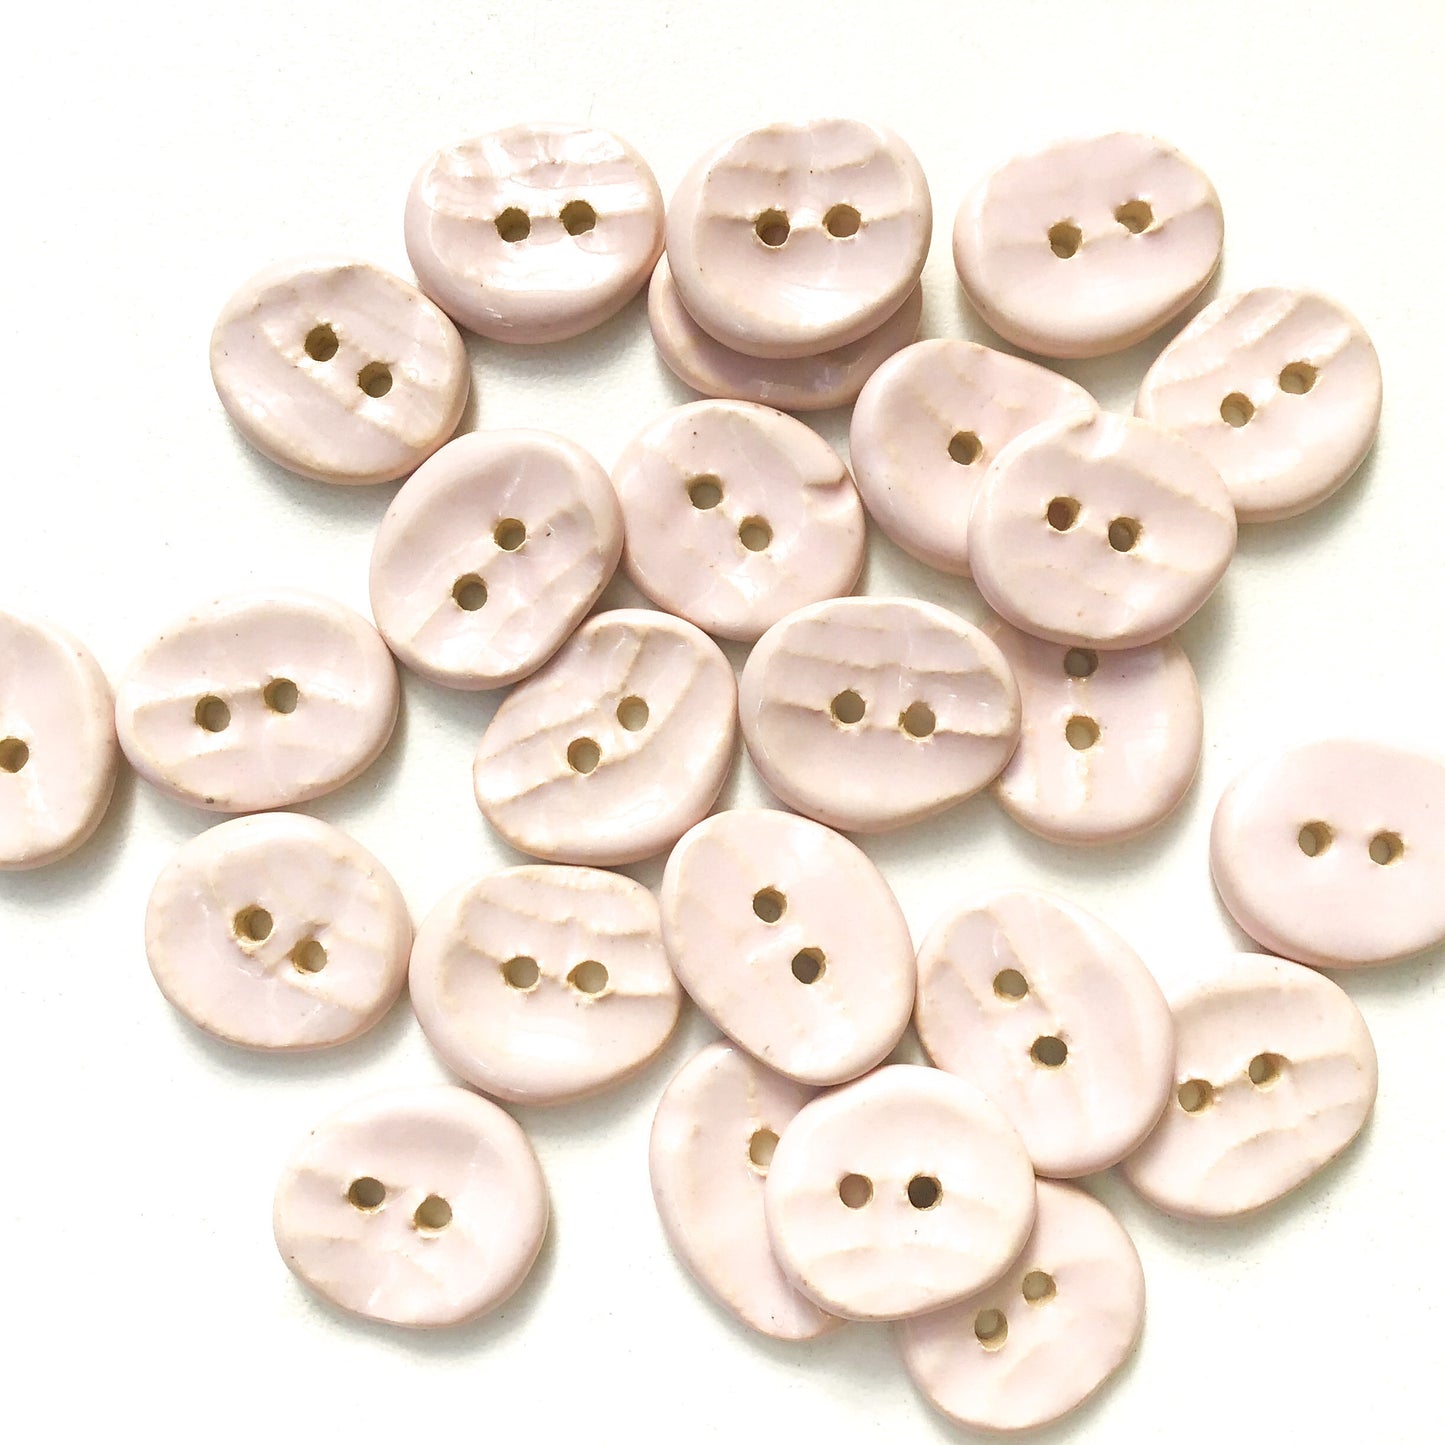 Soft Pink Ceramic Buttons - Light Pink Clay Buttons - 3/4" x 5/8"